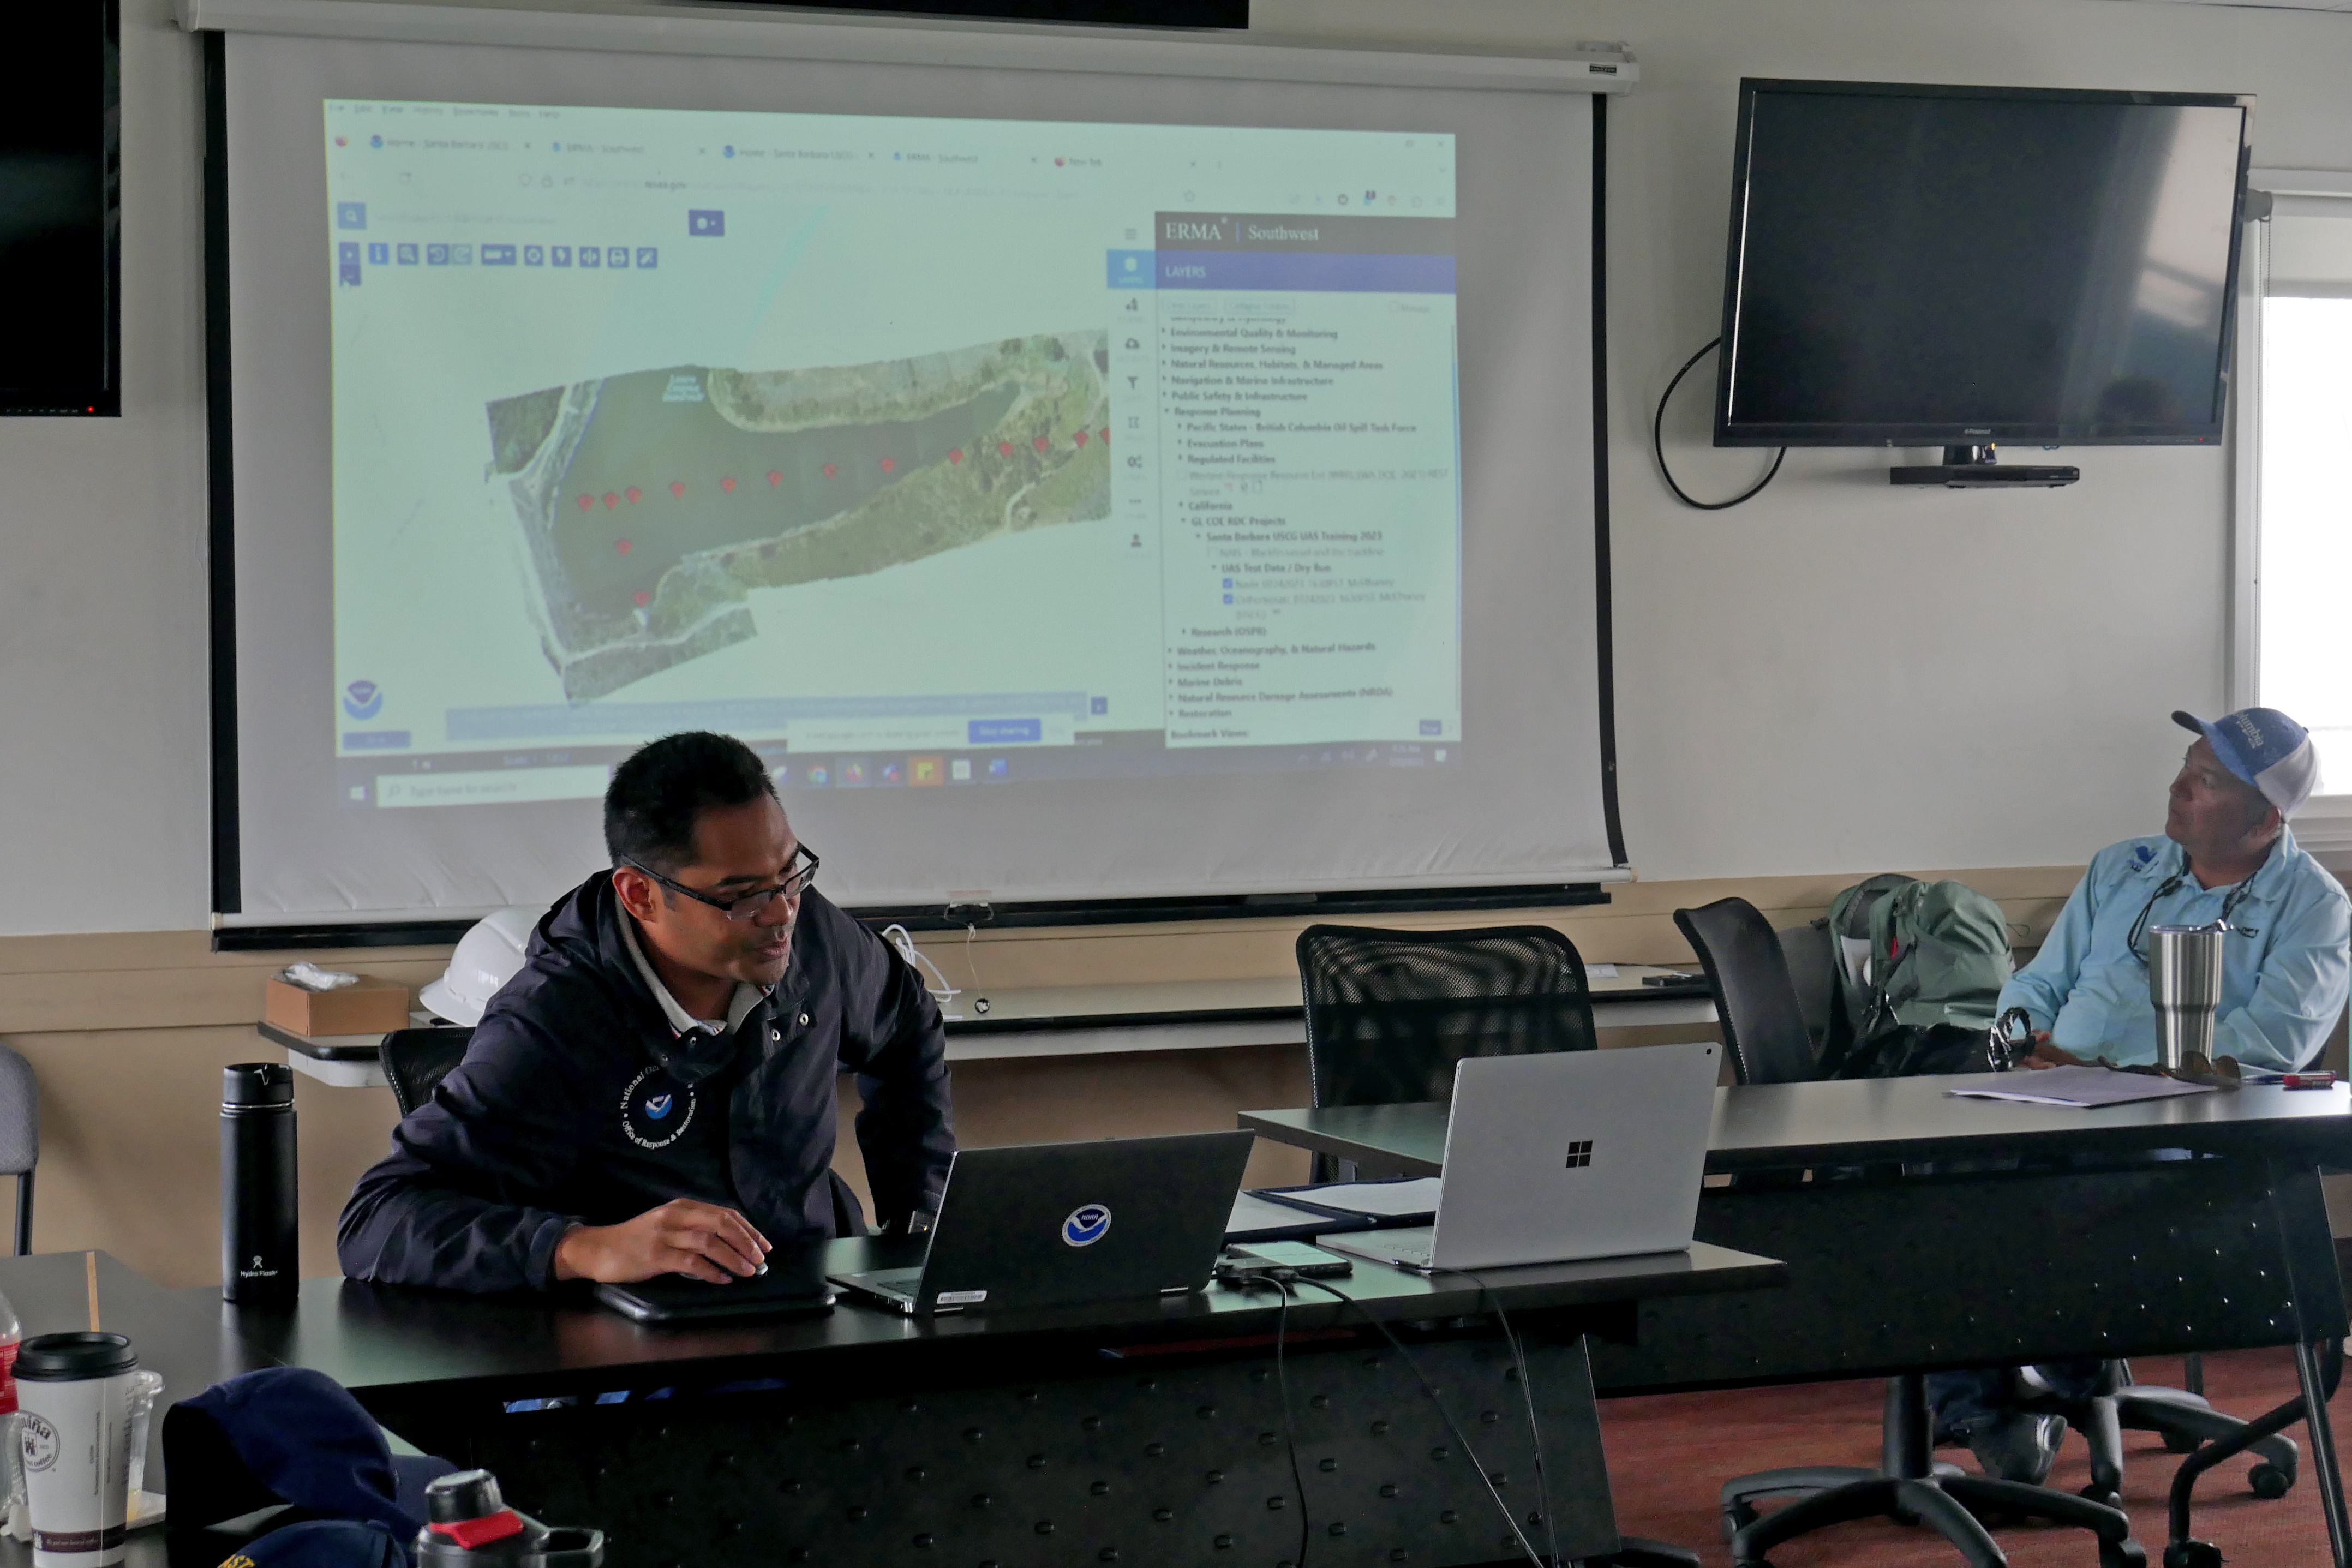 Spatial data specialist instructs class of drone pilots on the use of OR&R's Environmental Response Management Application (ERMA).